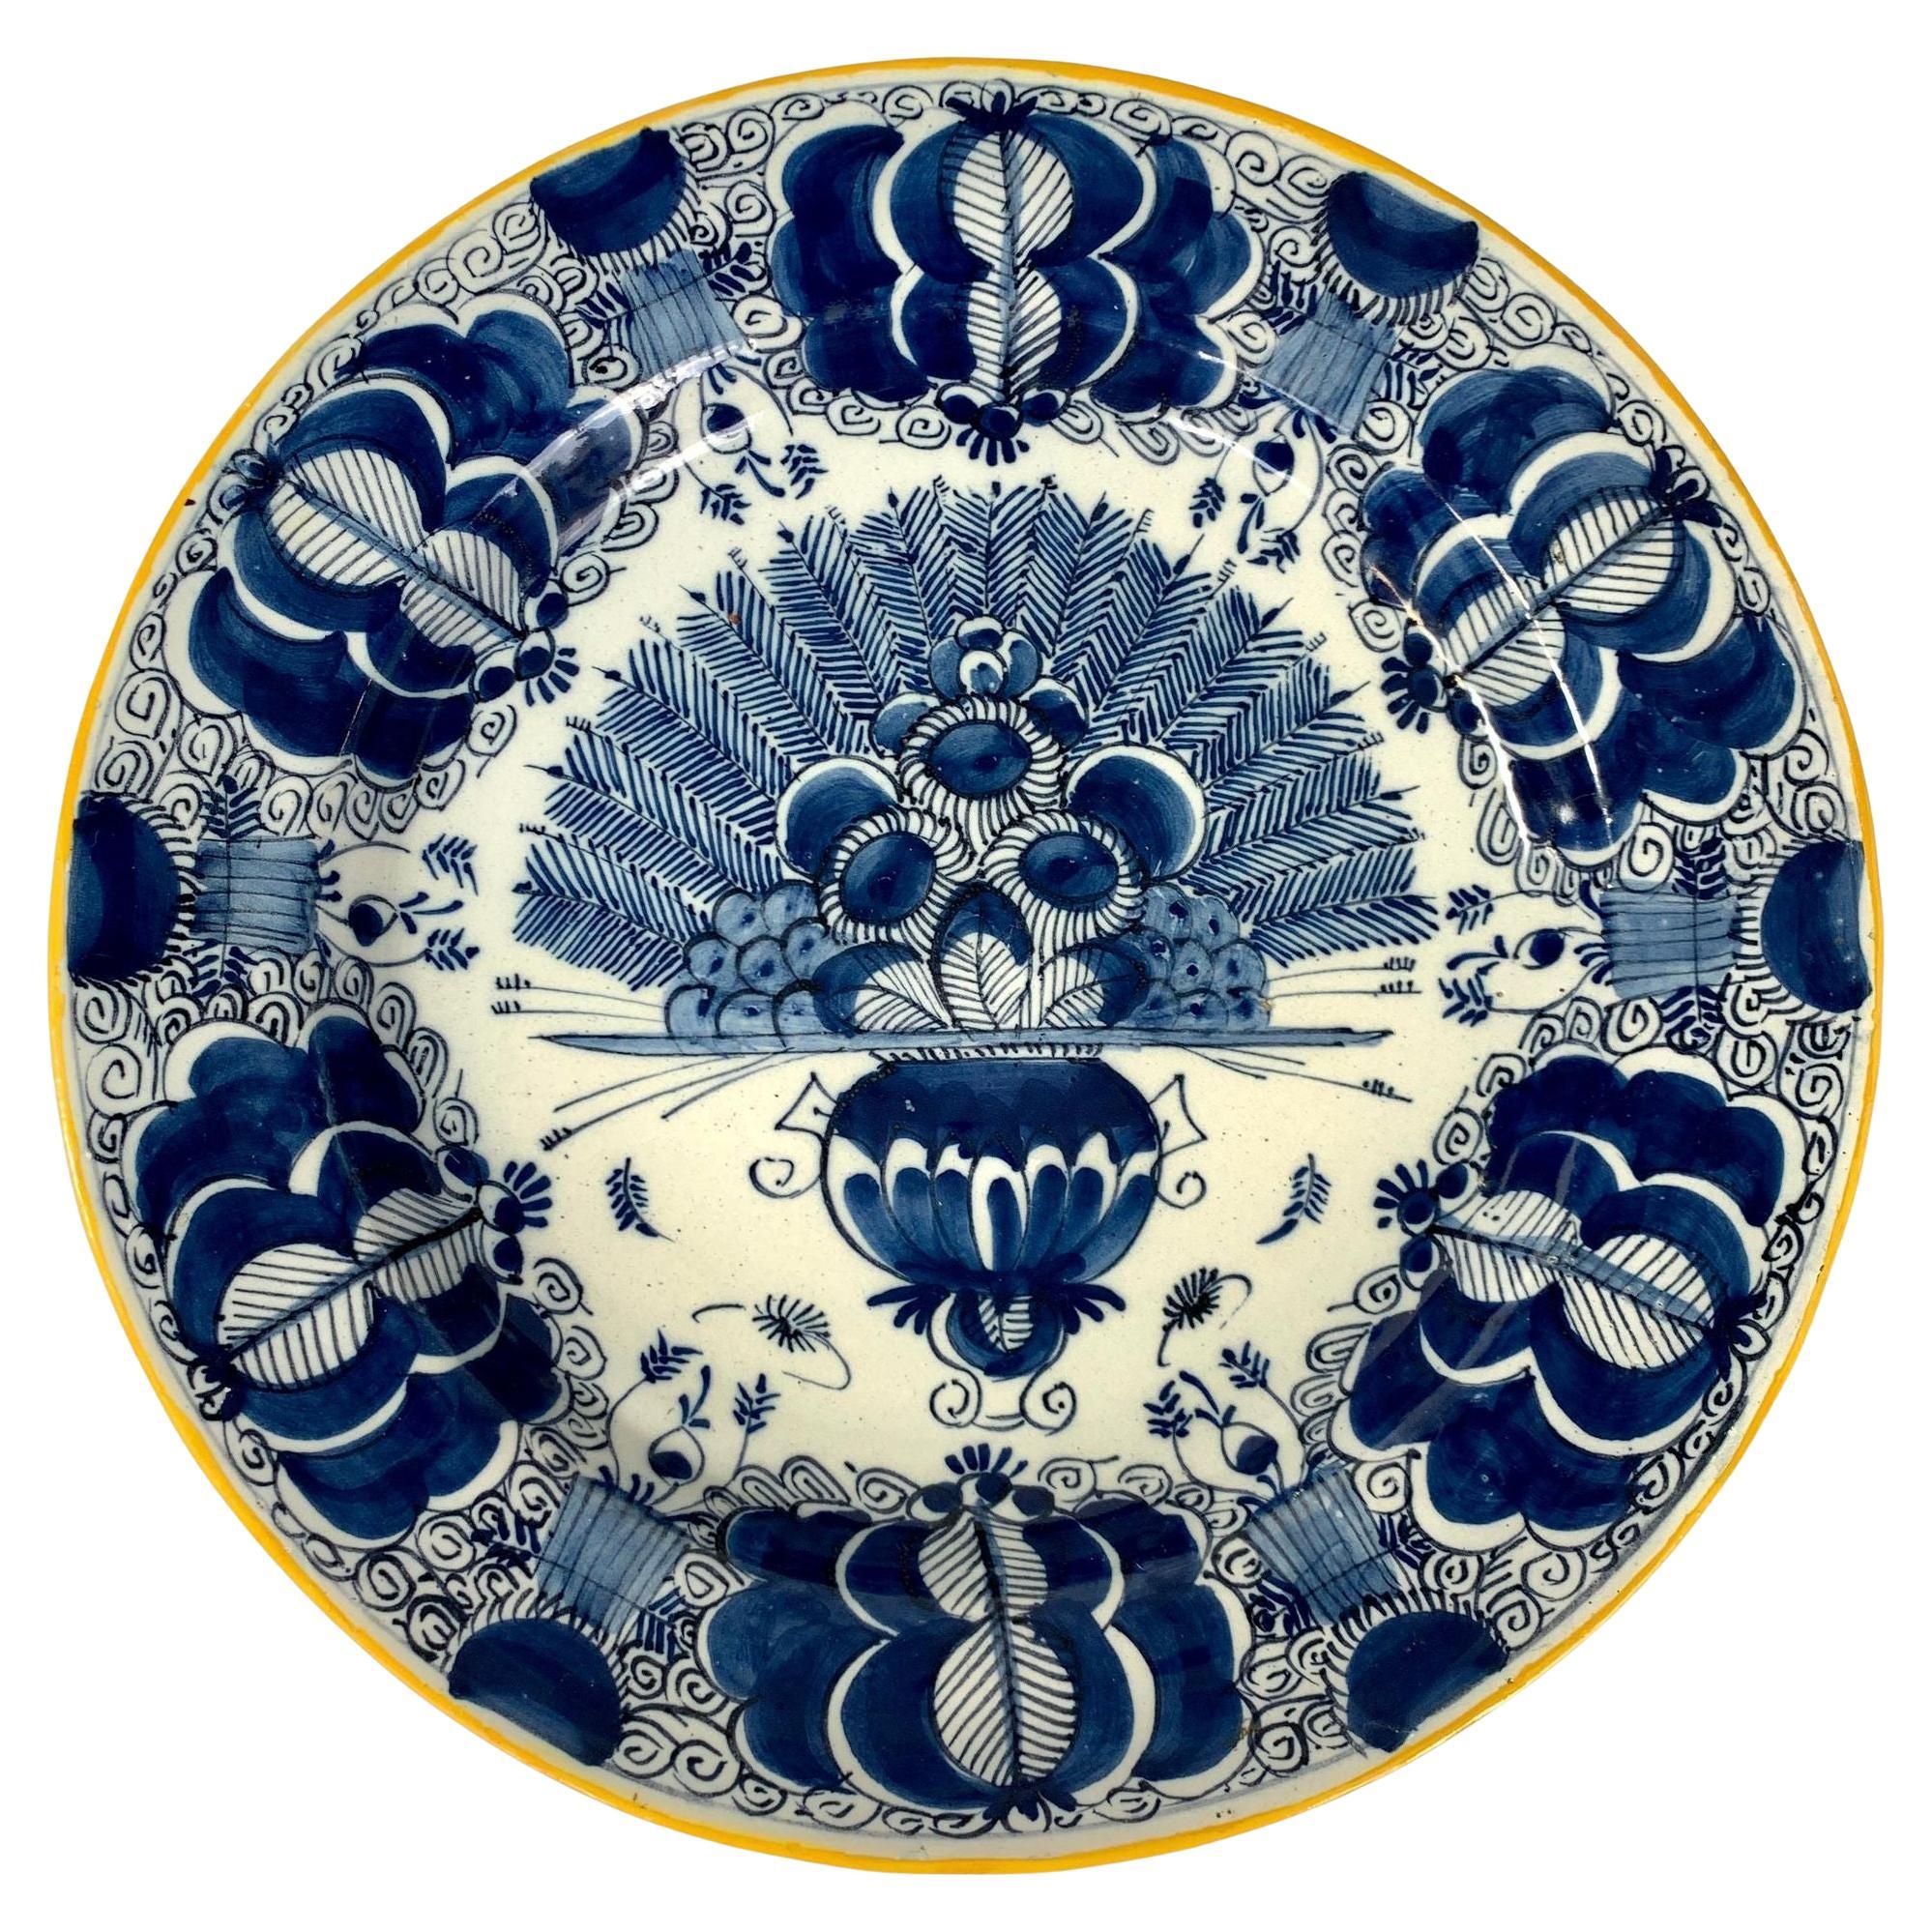 Blue and White Delft Charger Made by The Claw in the Netherlands circa 1780